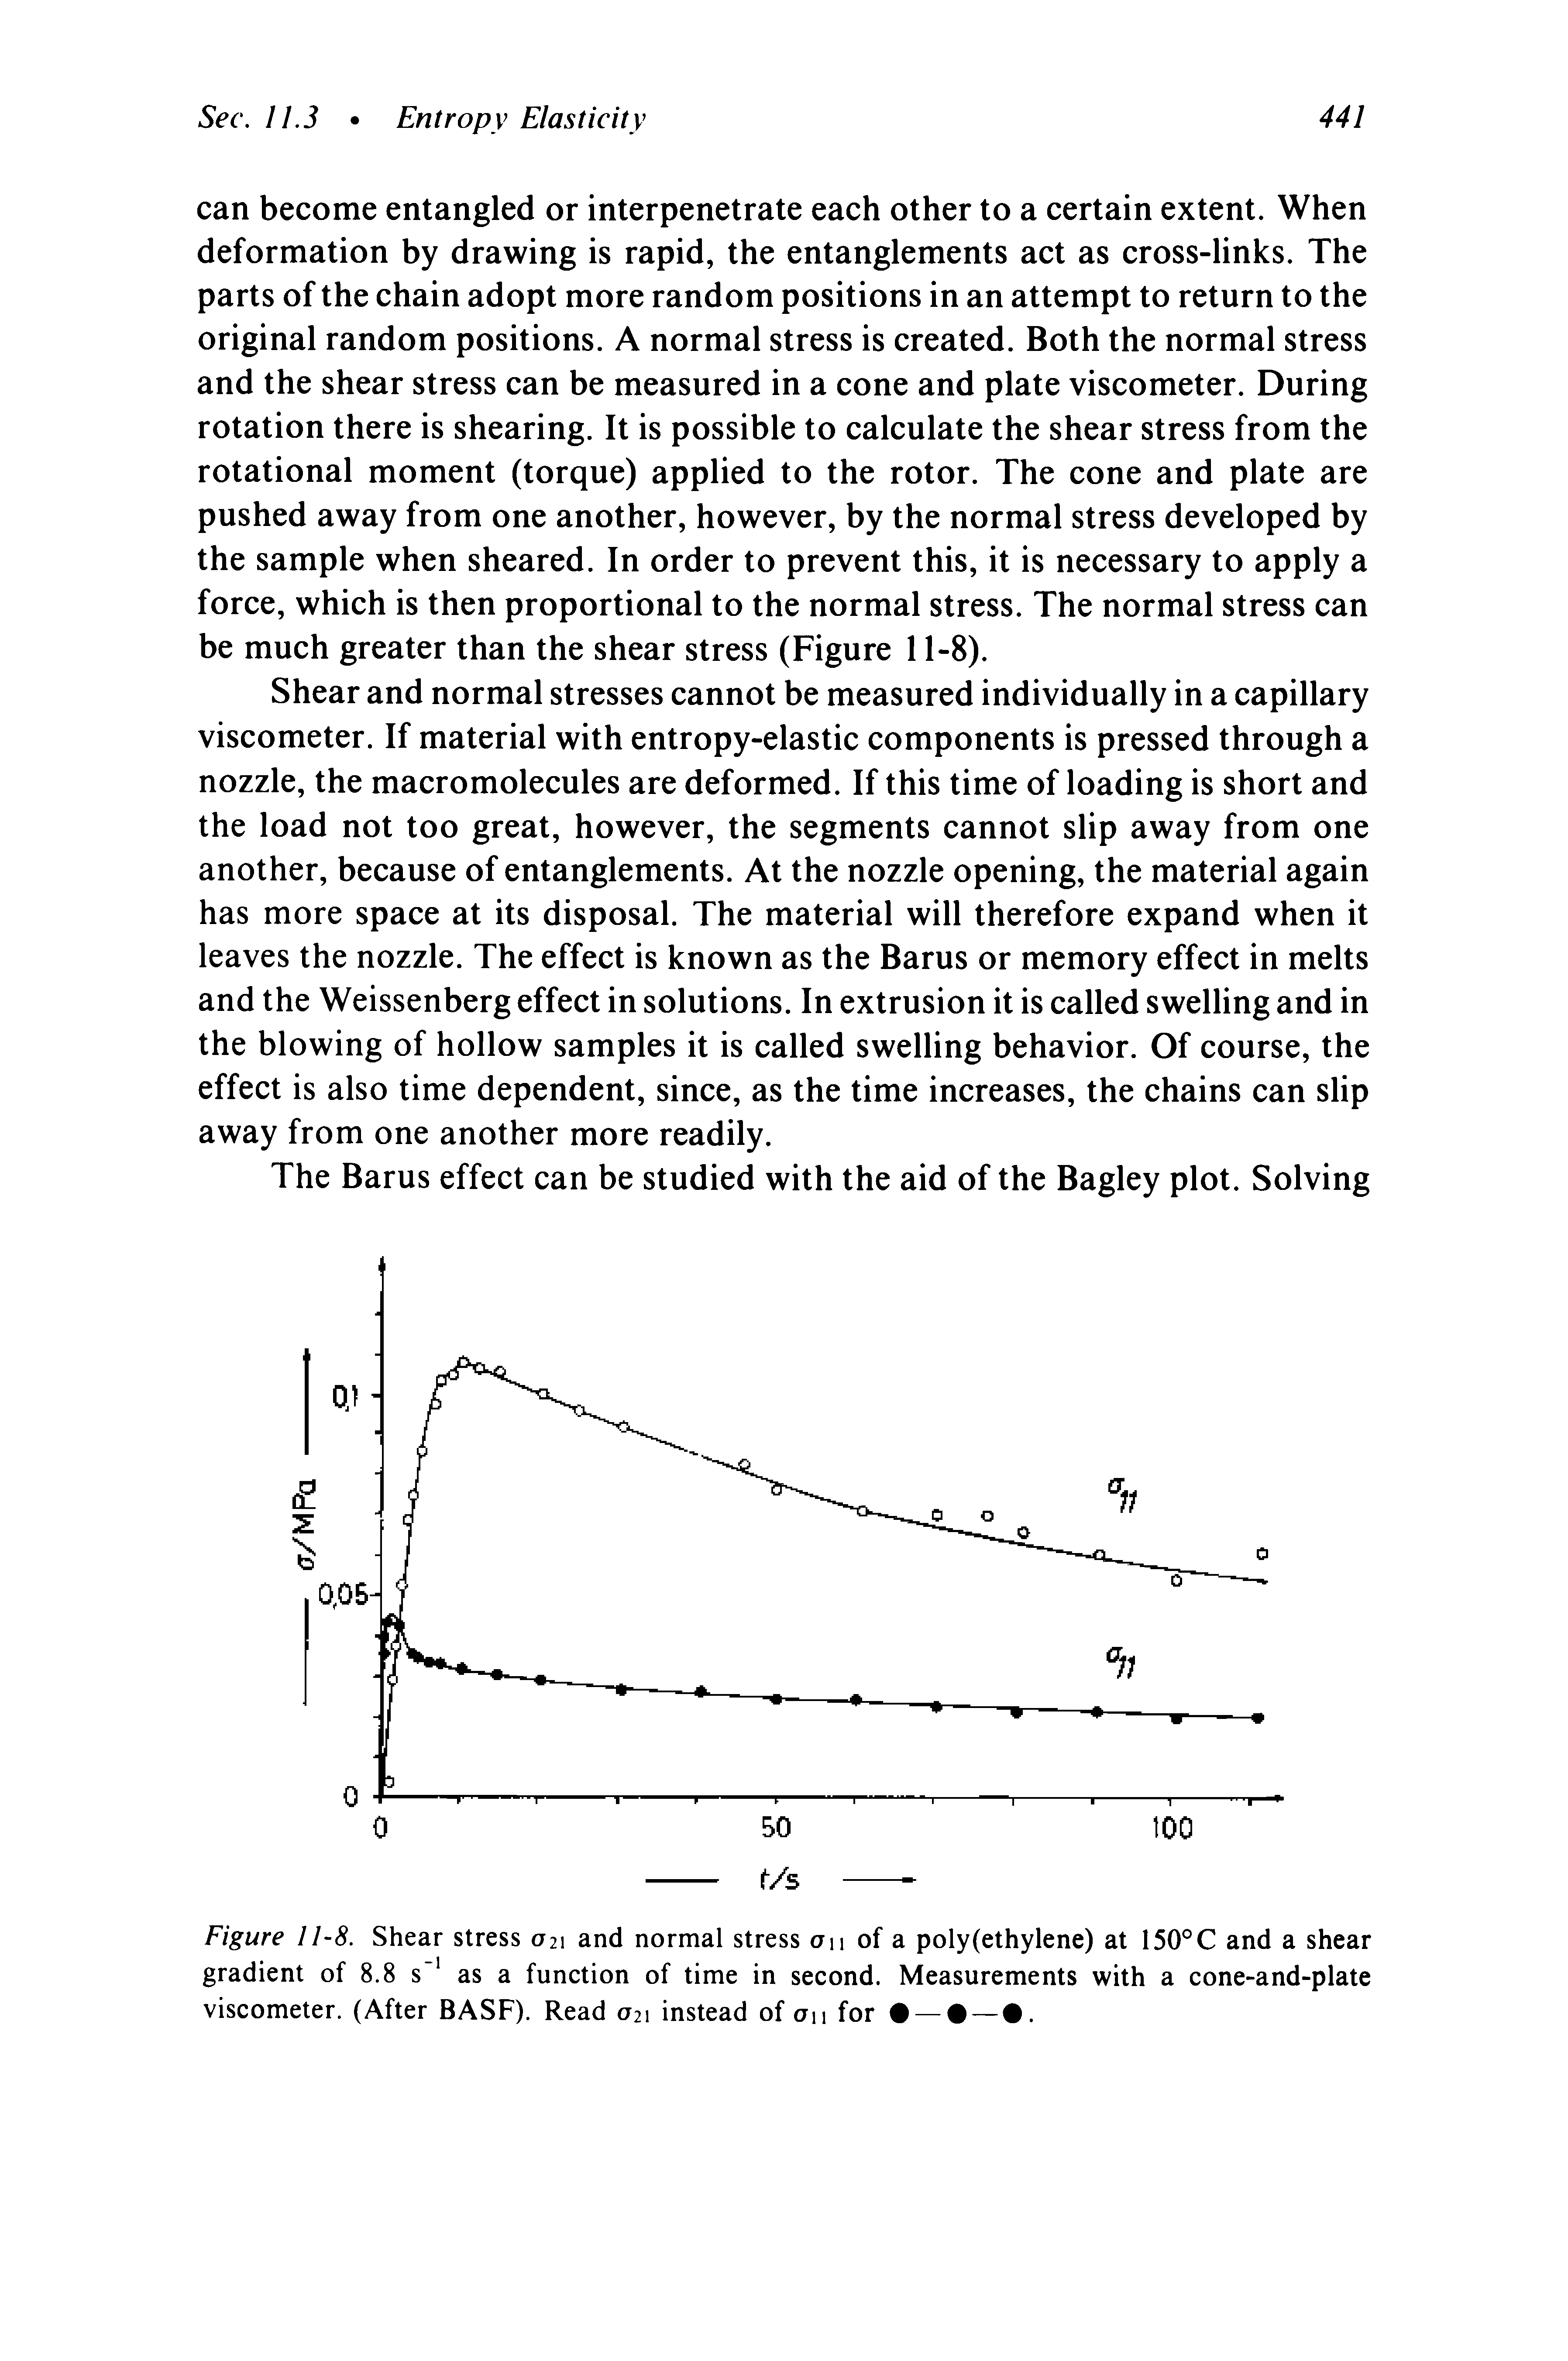 Figure 11-8. Shear stress 0 2 and normal stress an of a poly(ethylene) at 150°C and a shear gradient of 8.8 s as a function of time in second. Measurements with a cone-and-plate viscometer. (After BASF). Read 021 instead of an for — — .